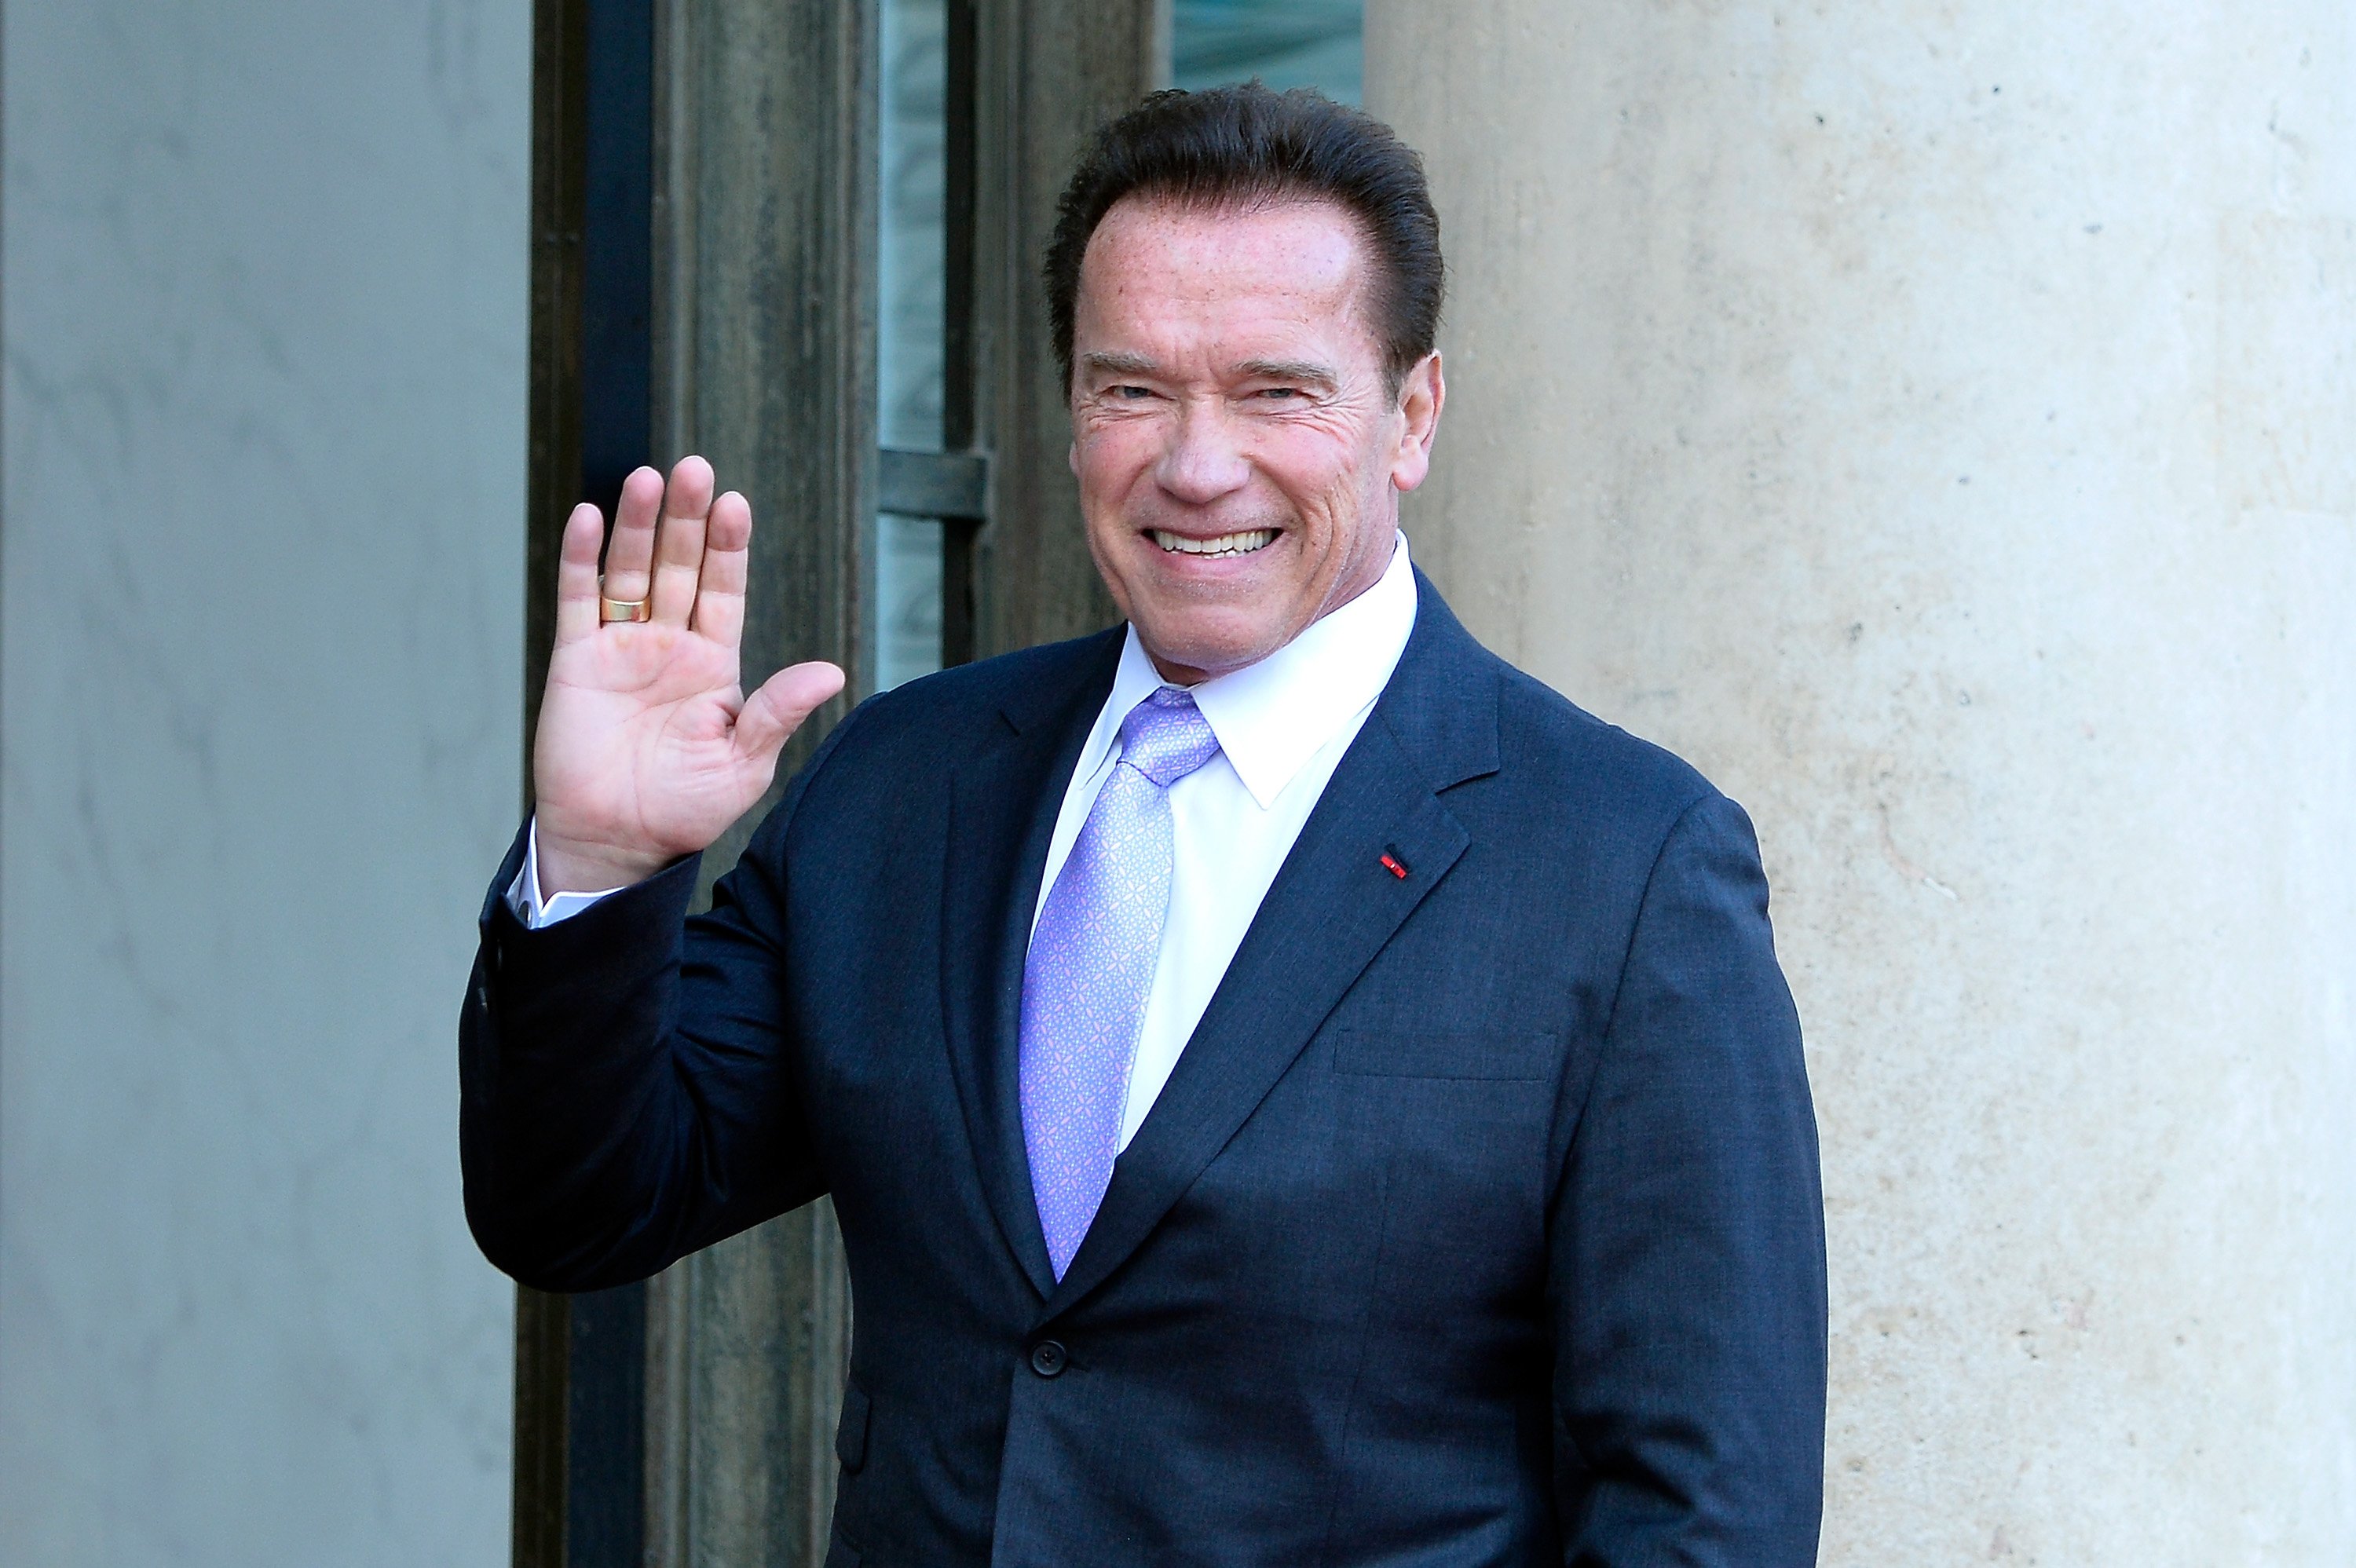  Arnold Schwarzenegger attends the One Planet Summit on December 12, 2017, in Paris, France. | Source: Getty Images.